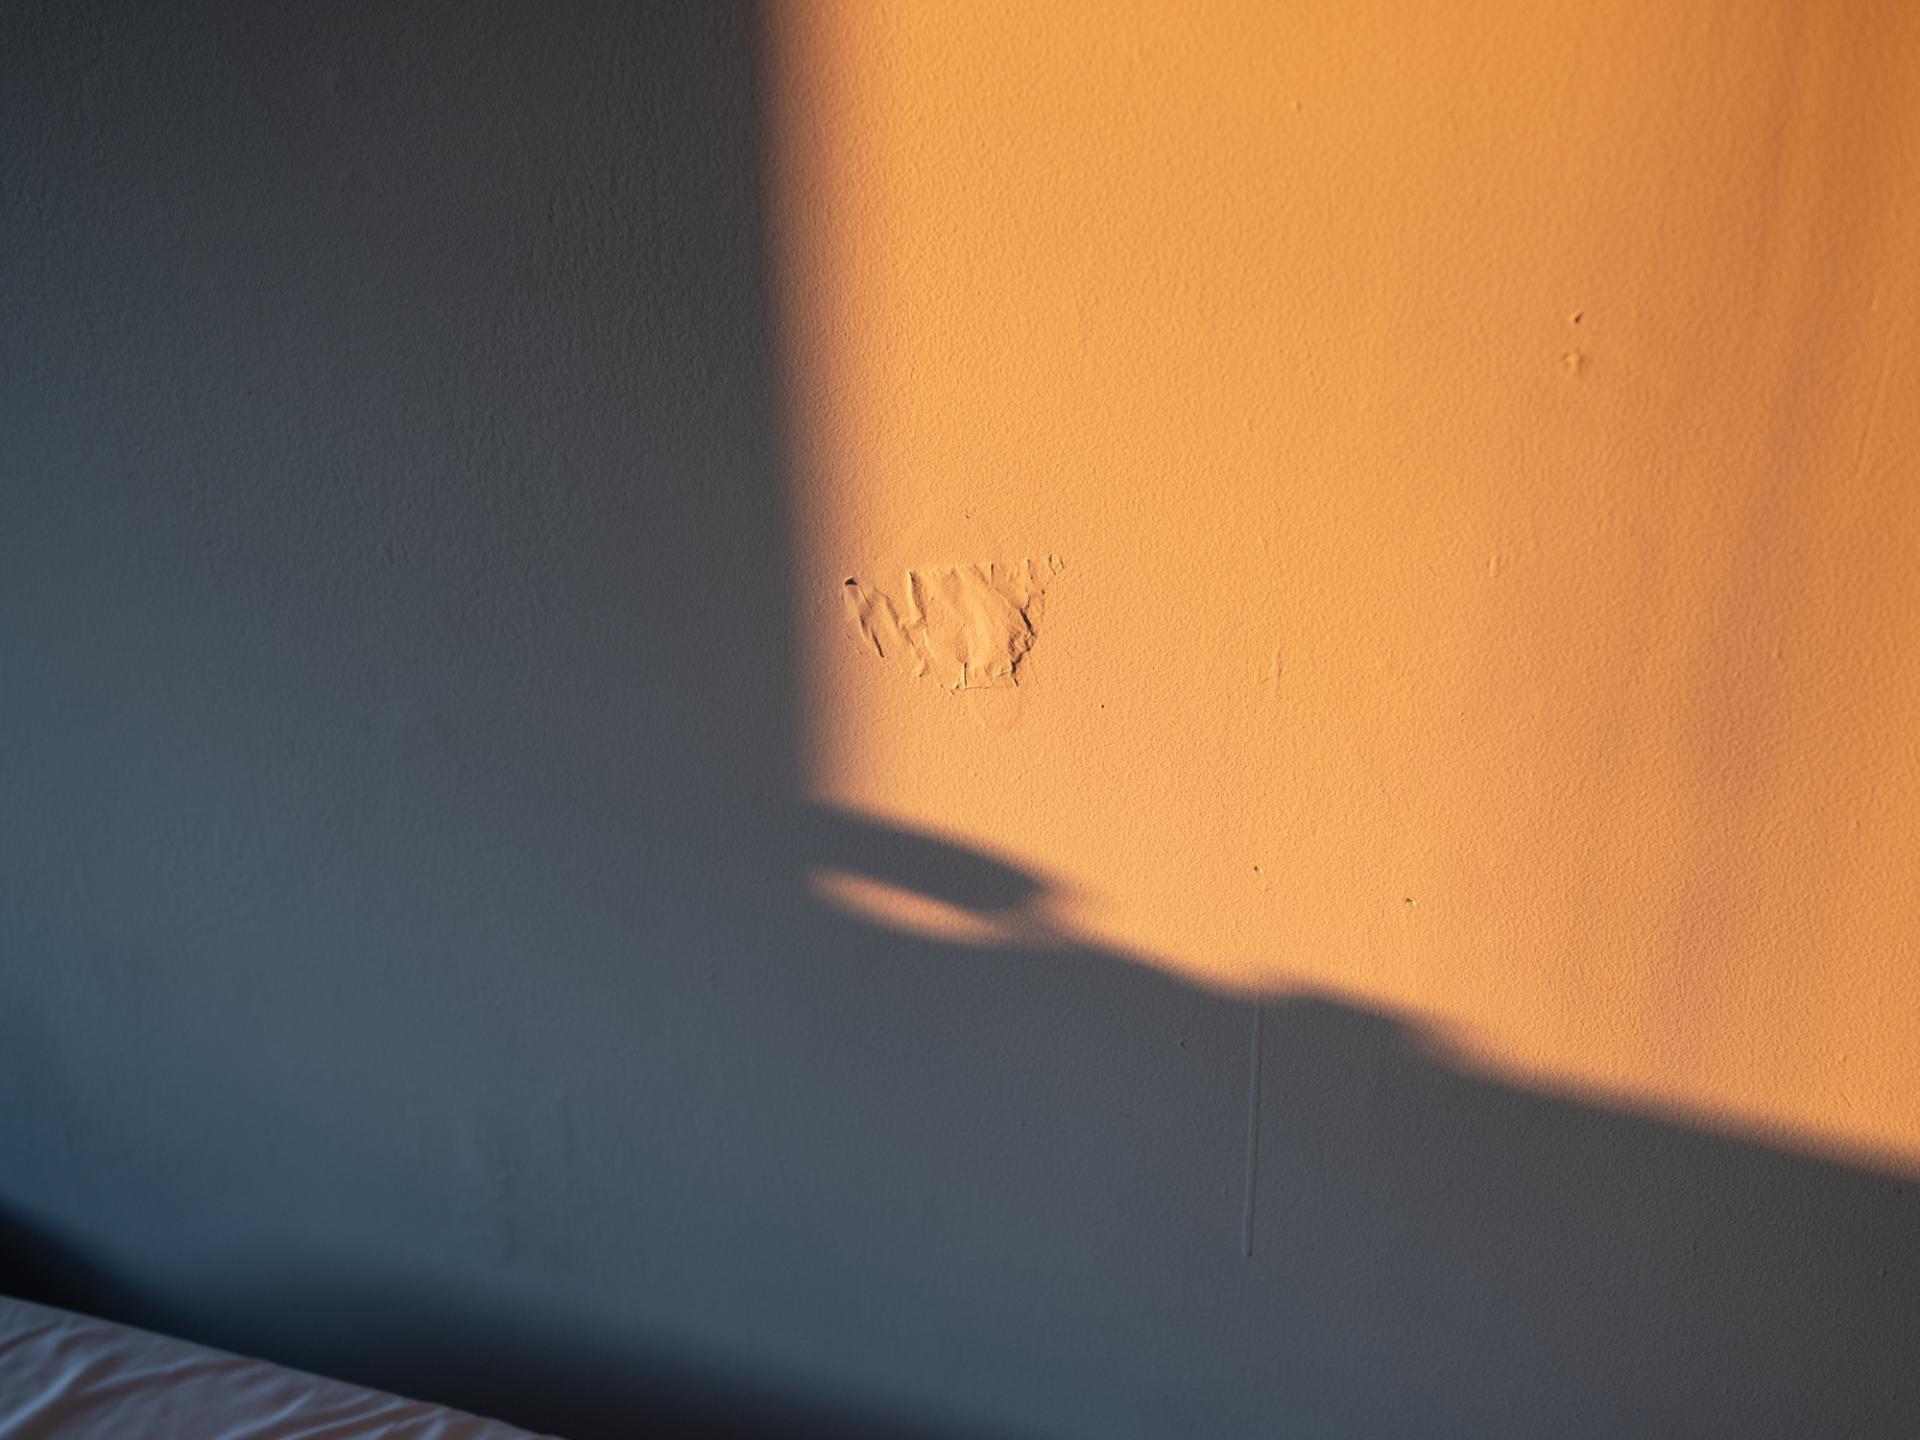 mark on bedroom wall with sunlight